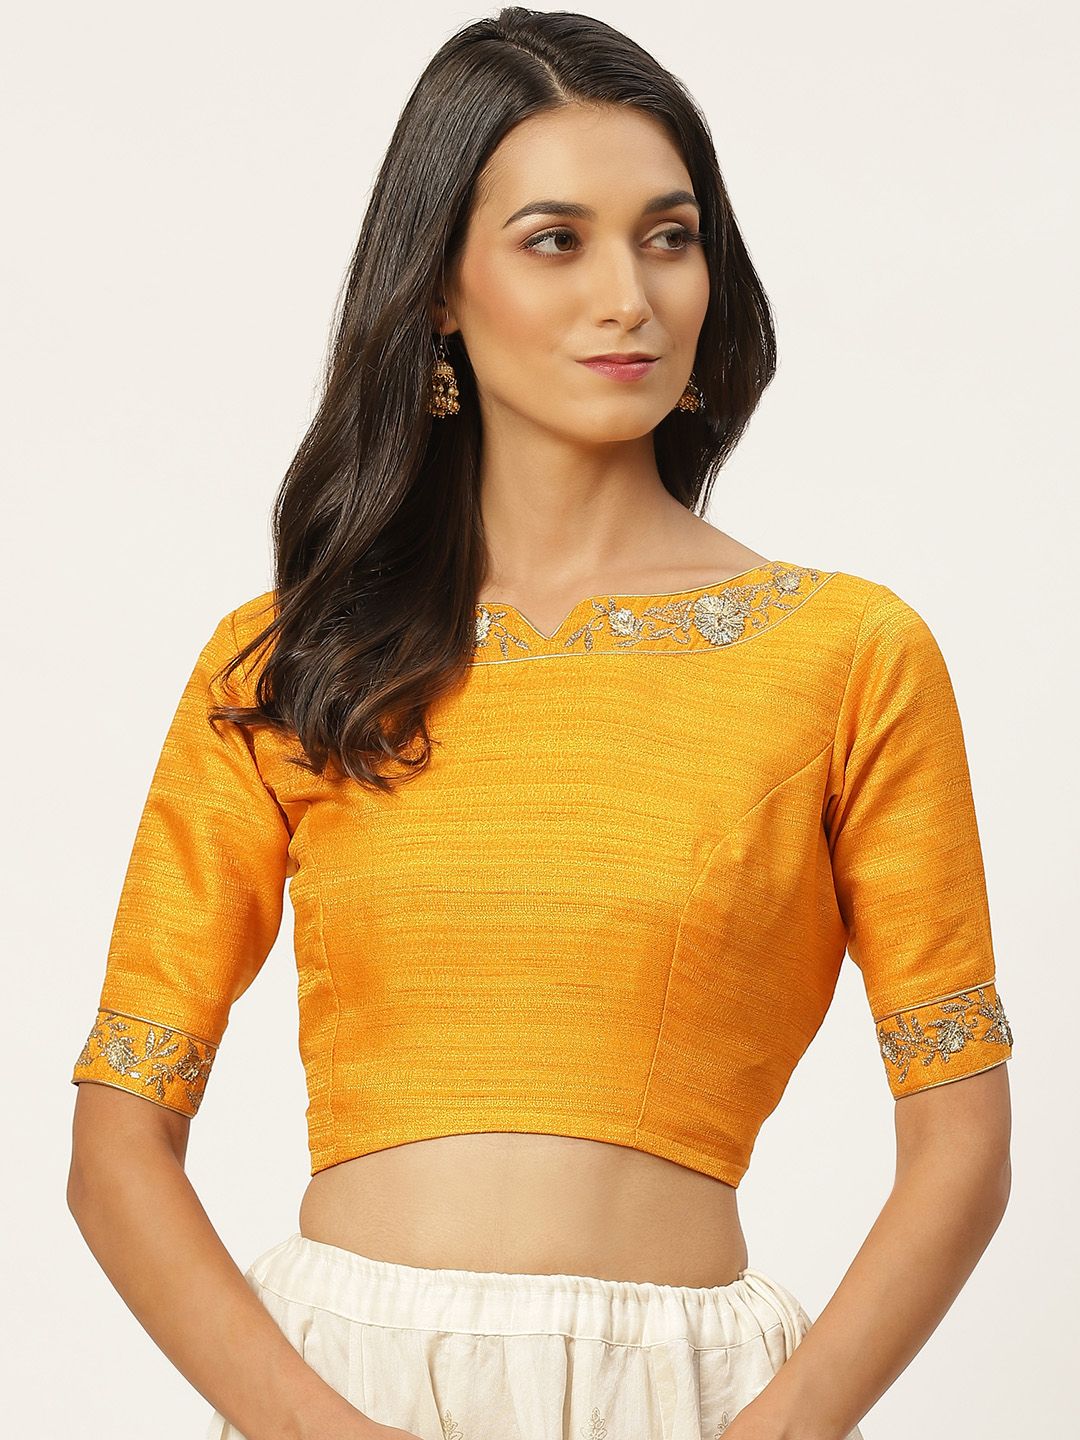 Studio Shringaar Women Mustard & Golden Solid Stitched Blouse with Embroidered Detail Price in India